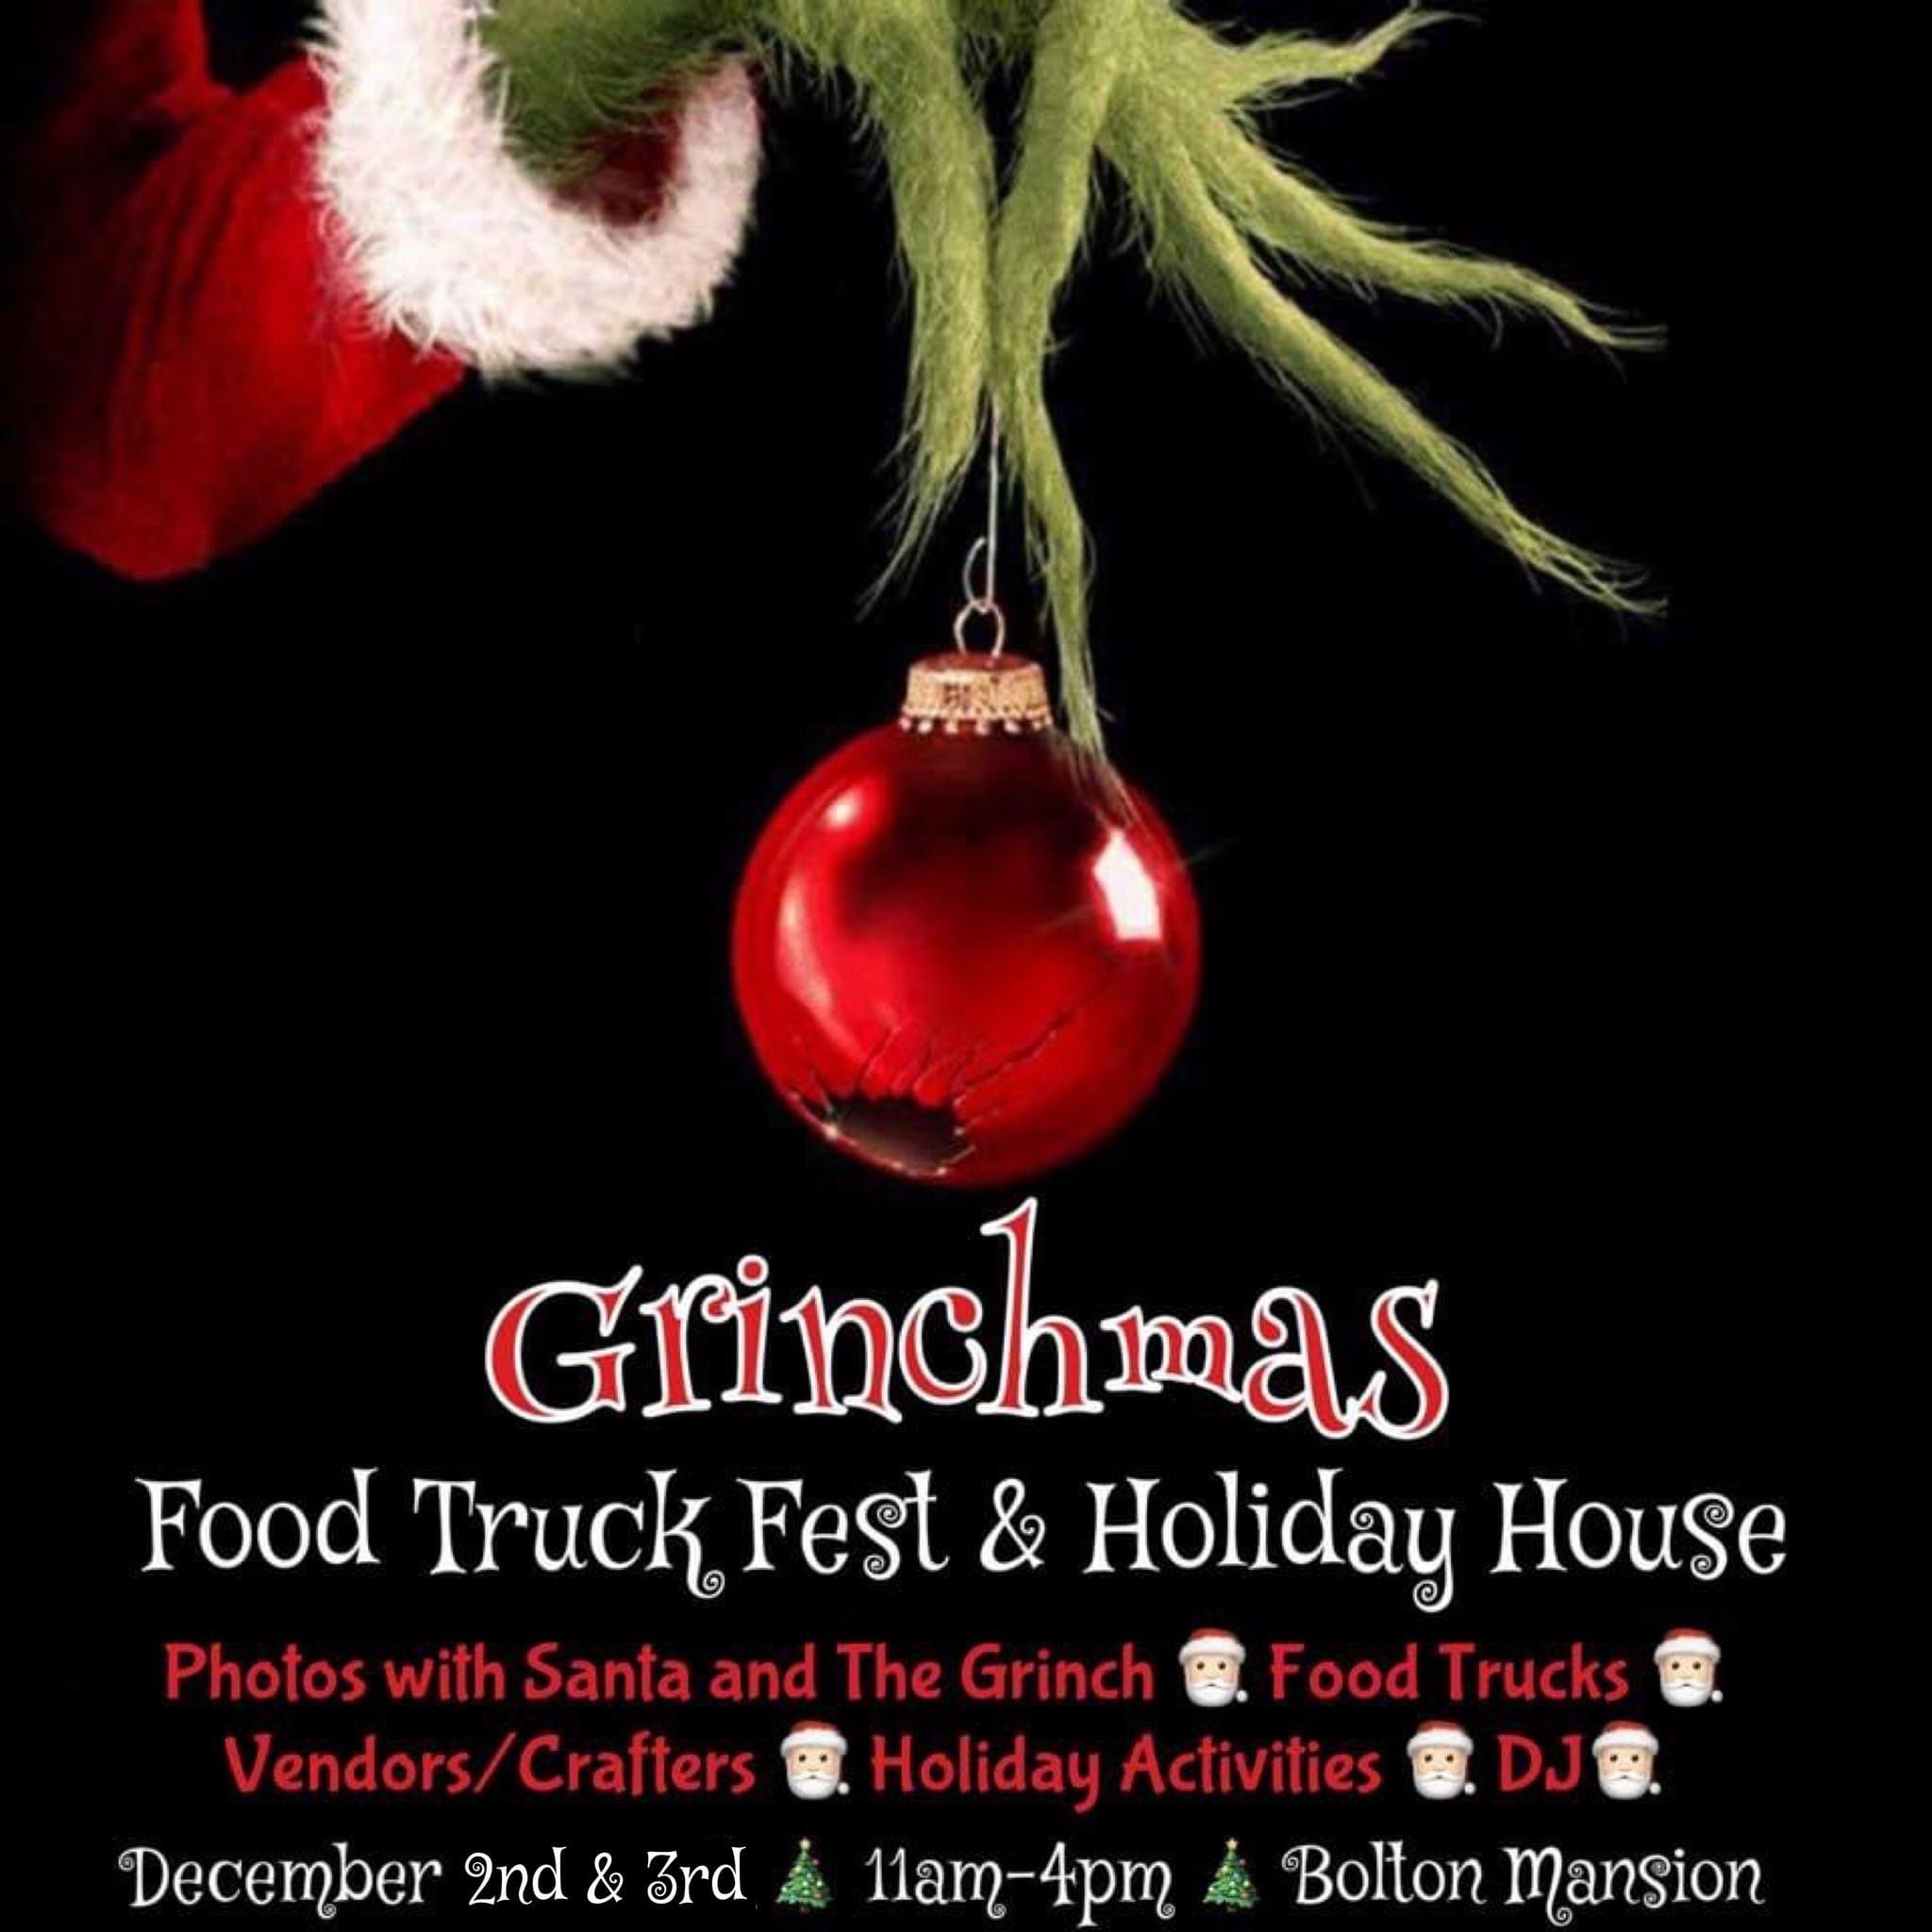 Jax’s at Grinchmas Food Truck Fest and Holiday House